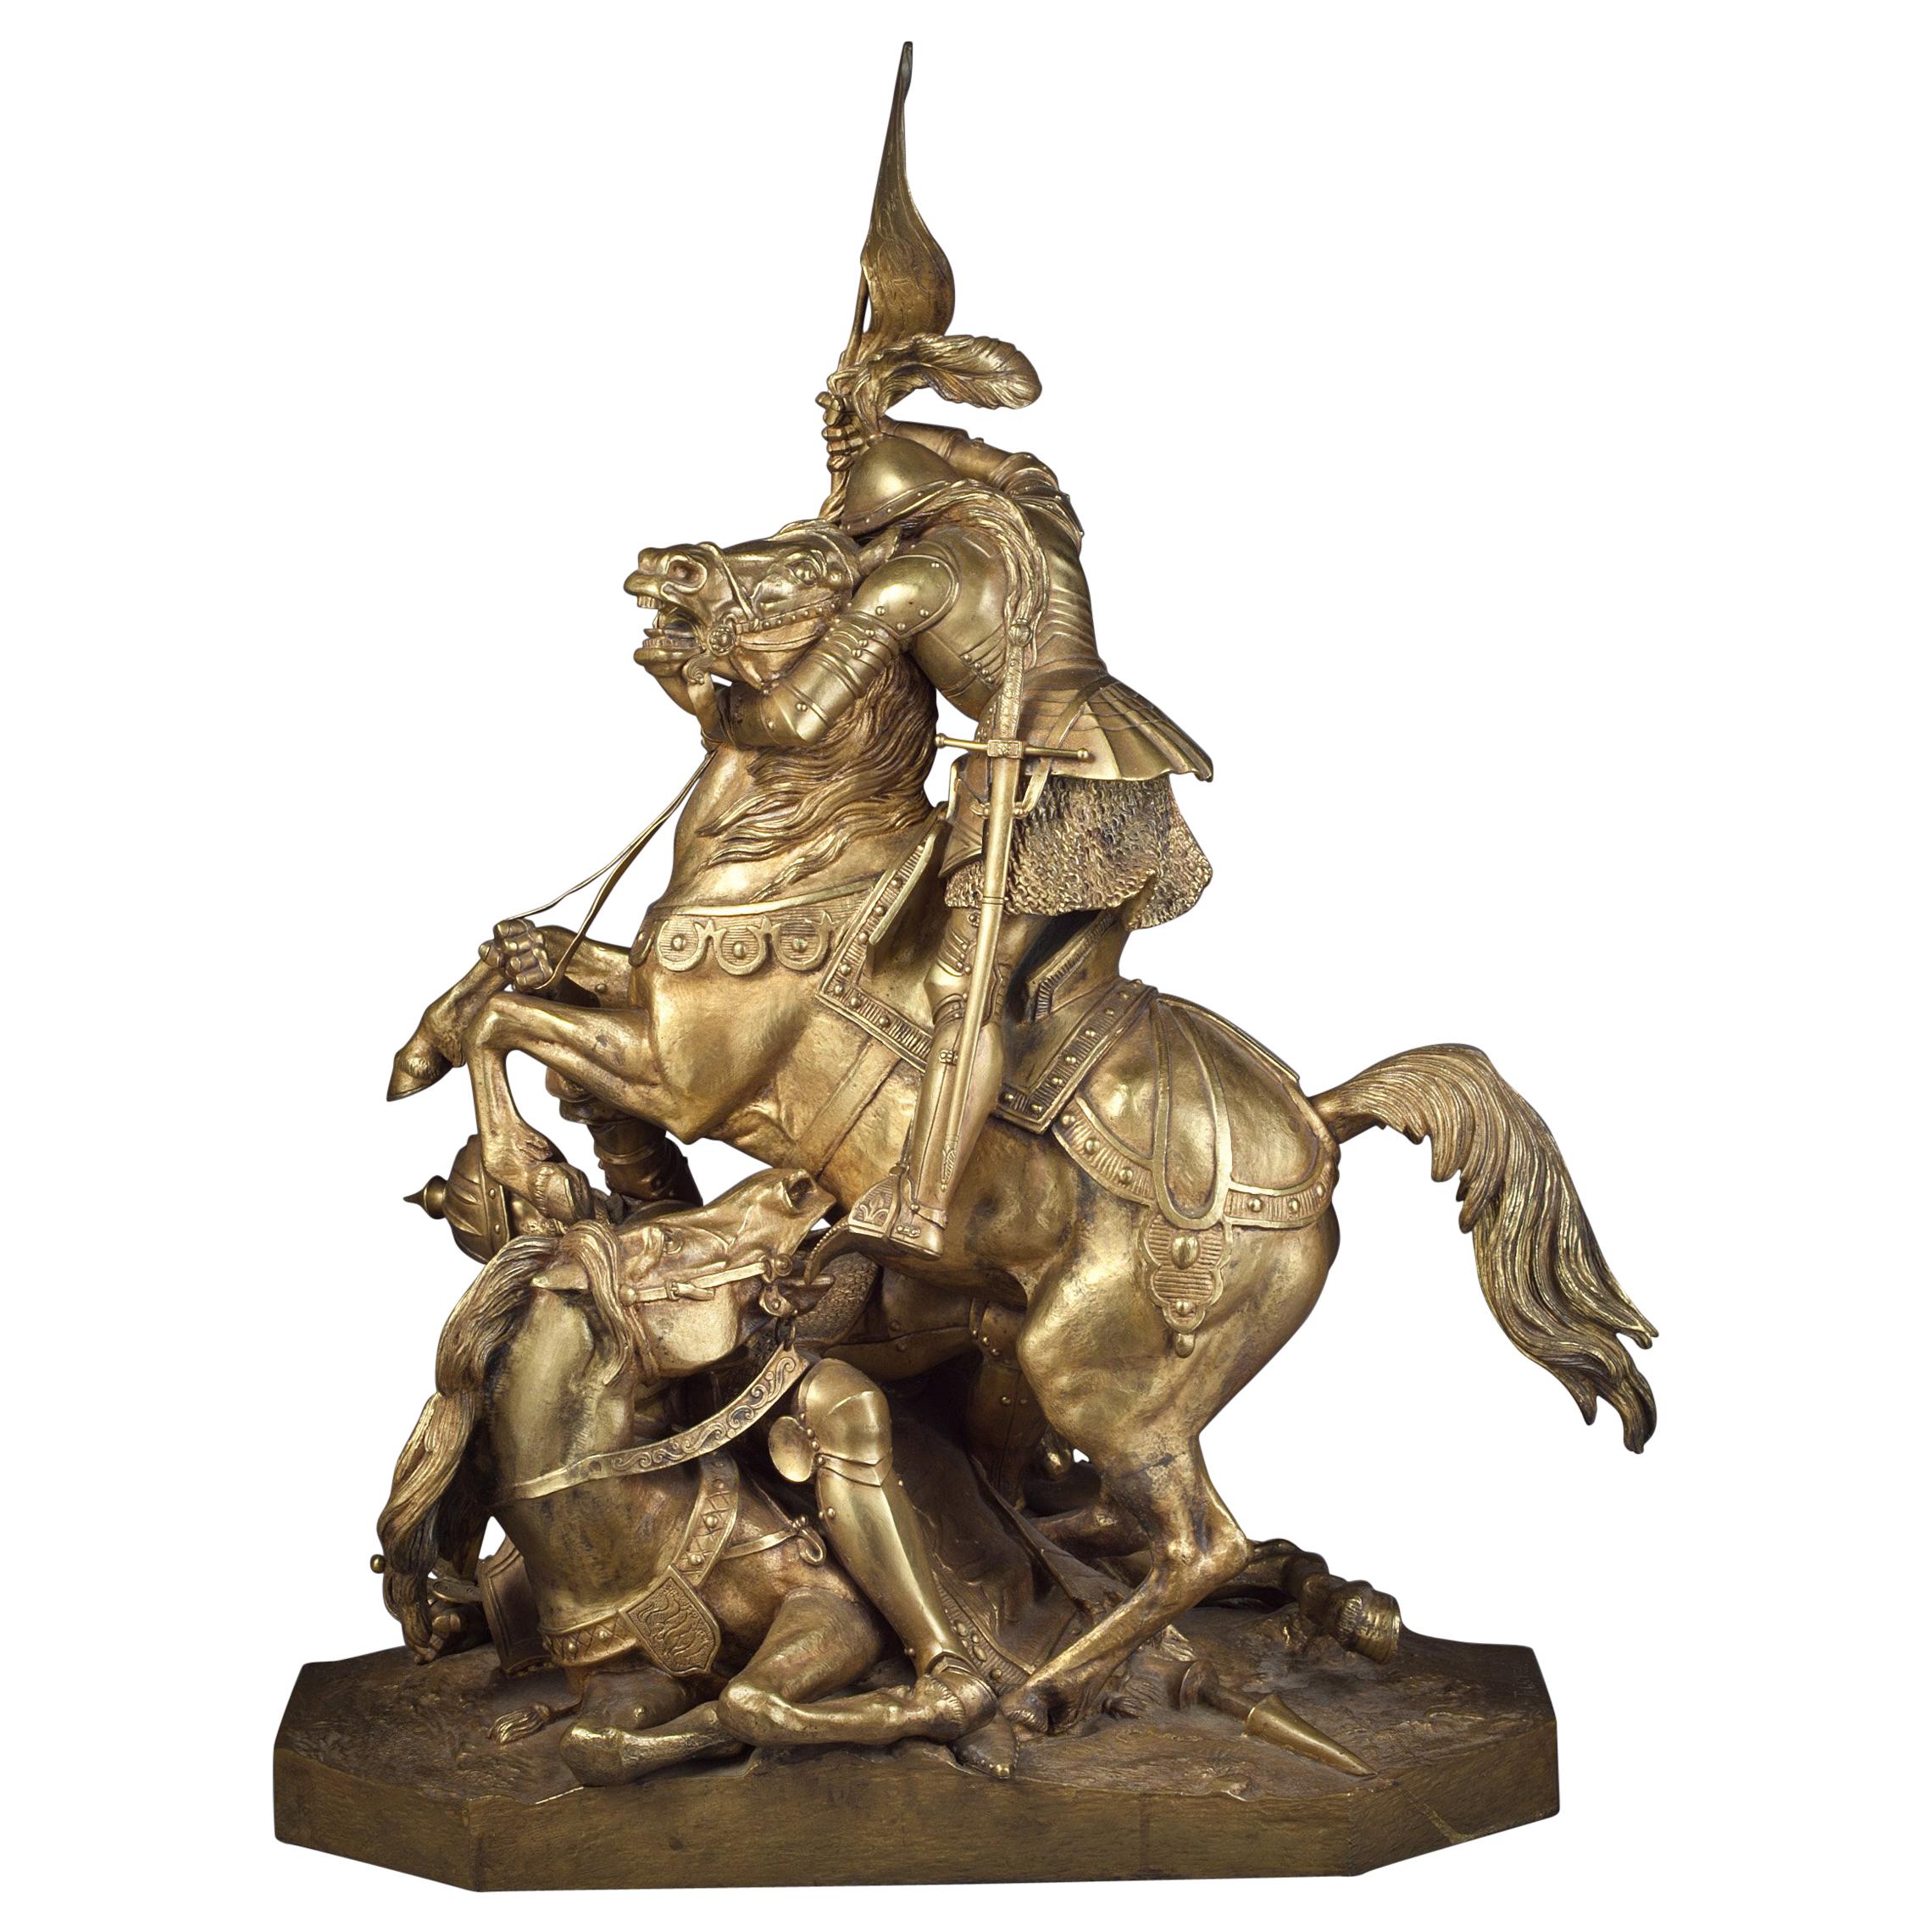 French Gilt Bronze of "Joan of Arc Defeating the English" by Theodore Gechter